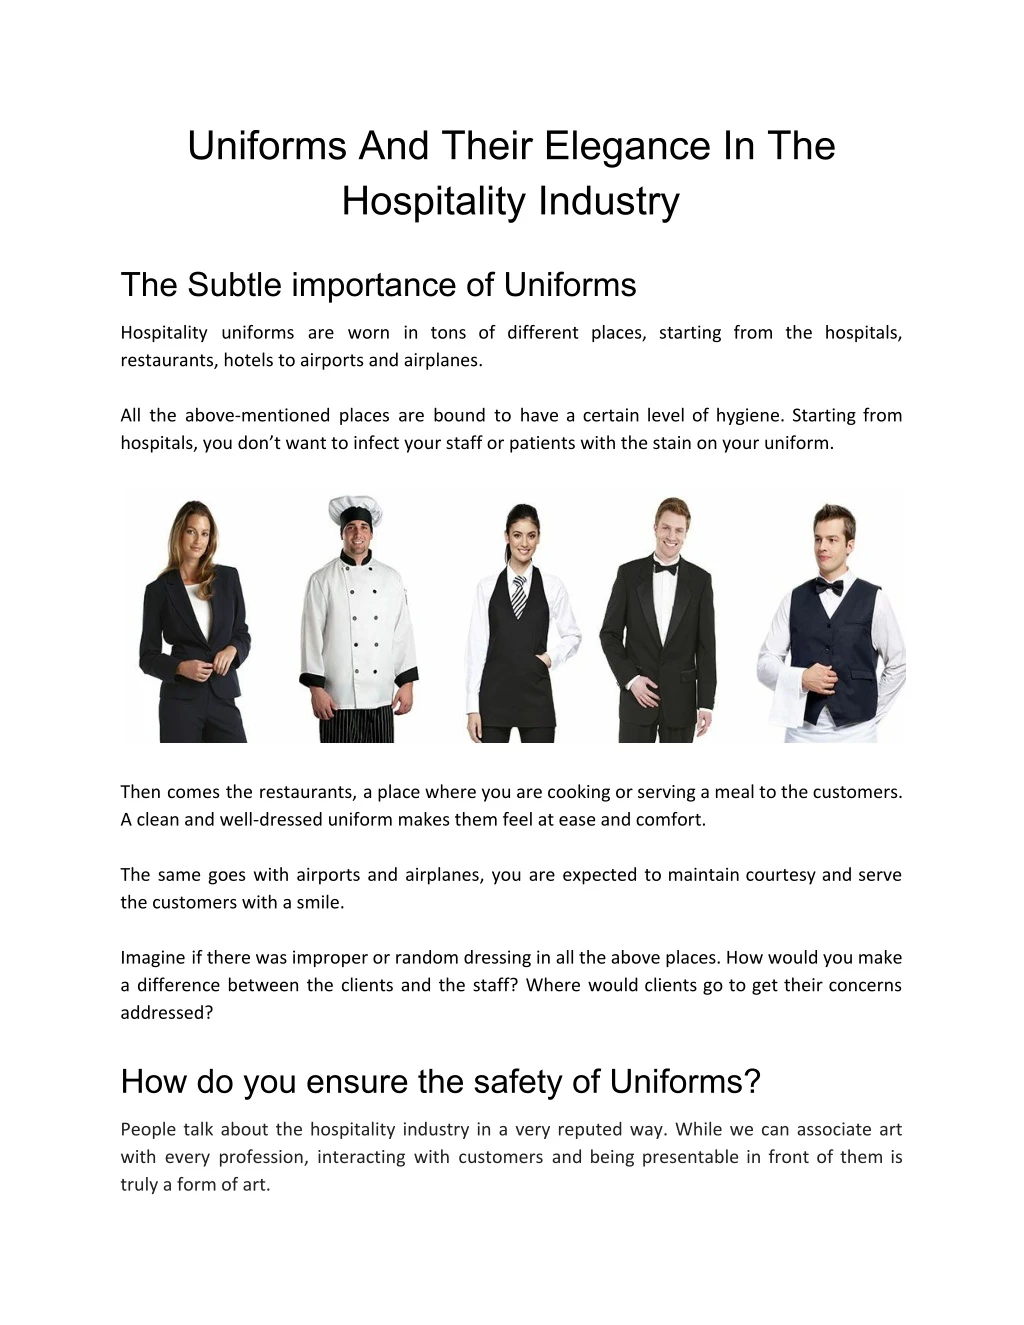 uniforms and their elegance in the hospitality